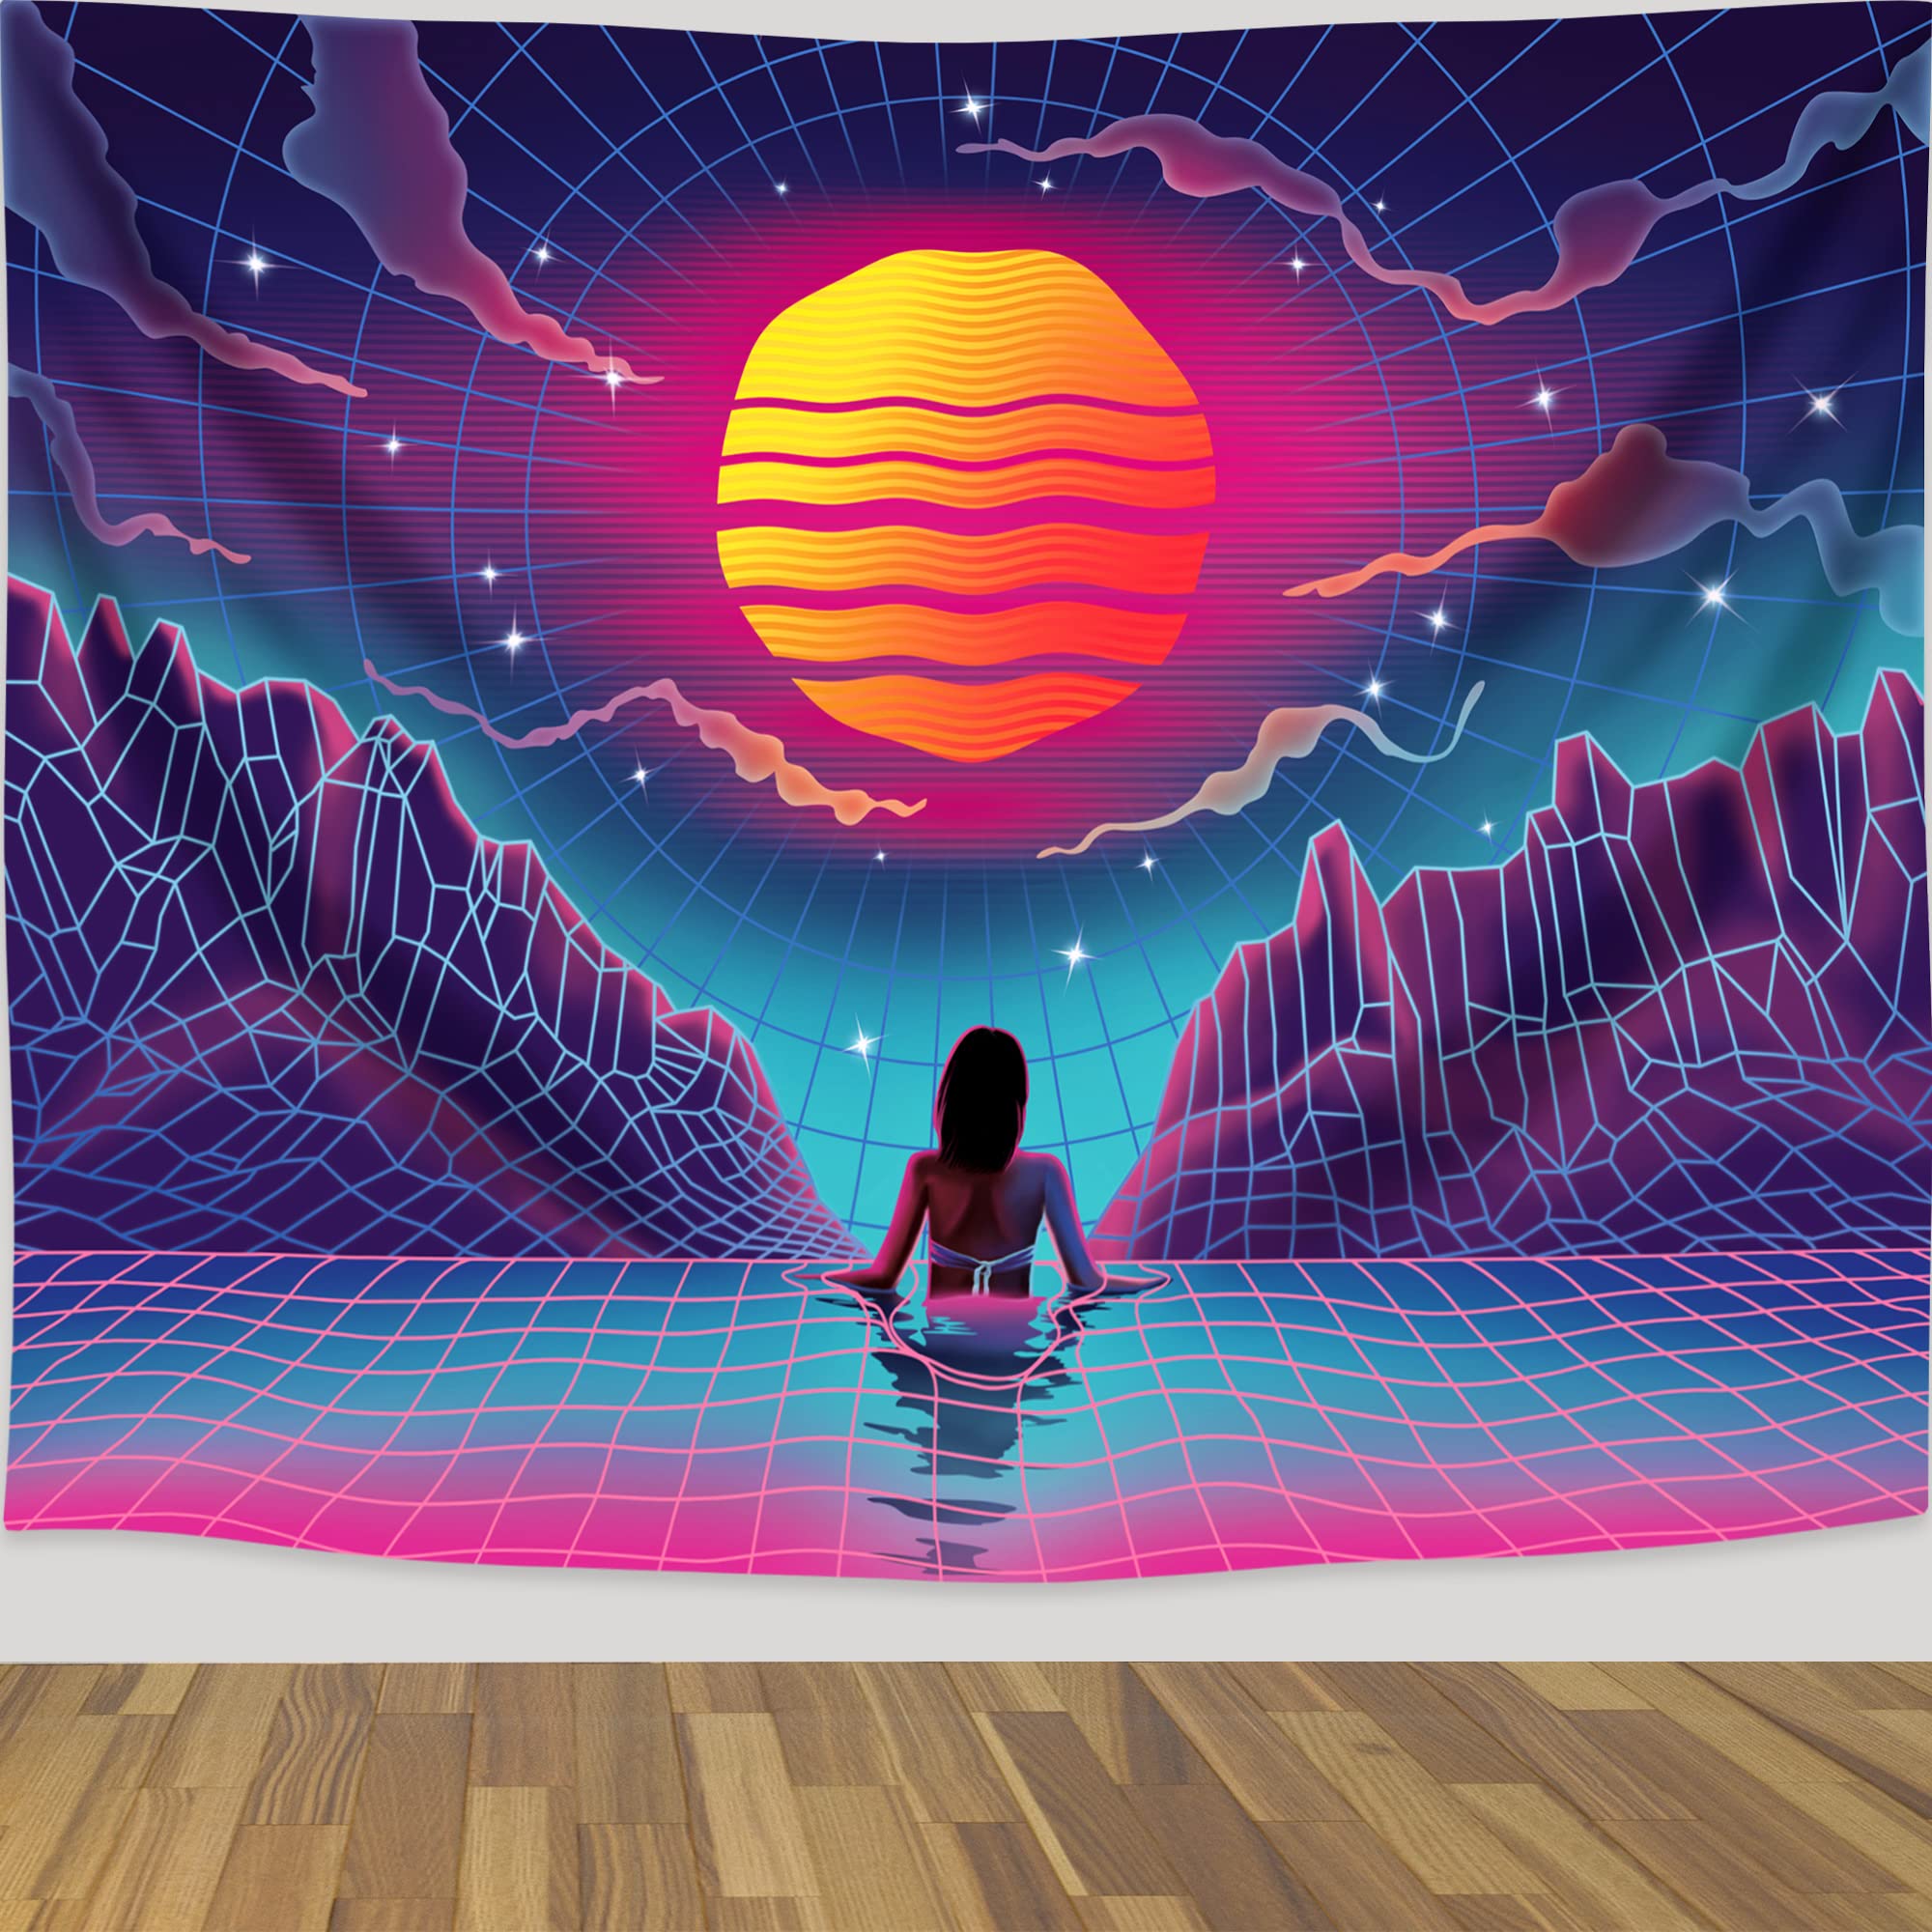 A woman sitting on the ground looking at an abstract sunset - Synthwave